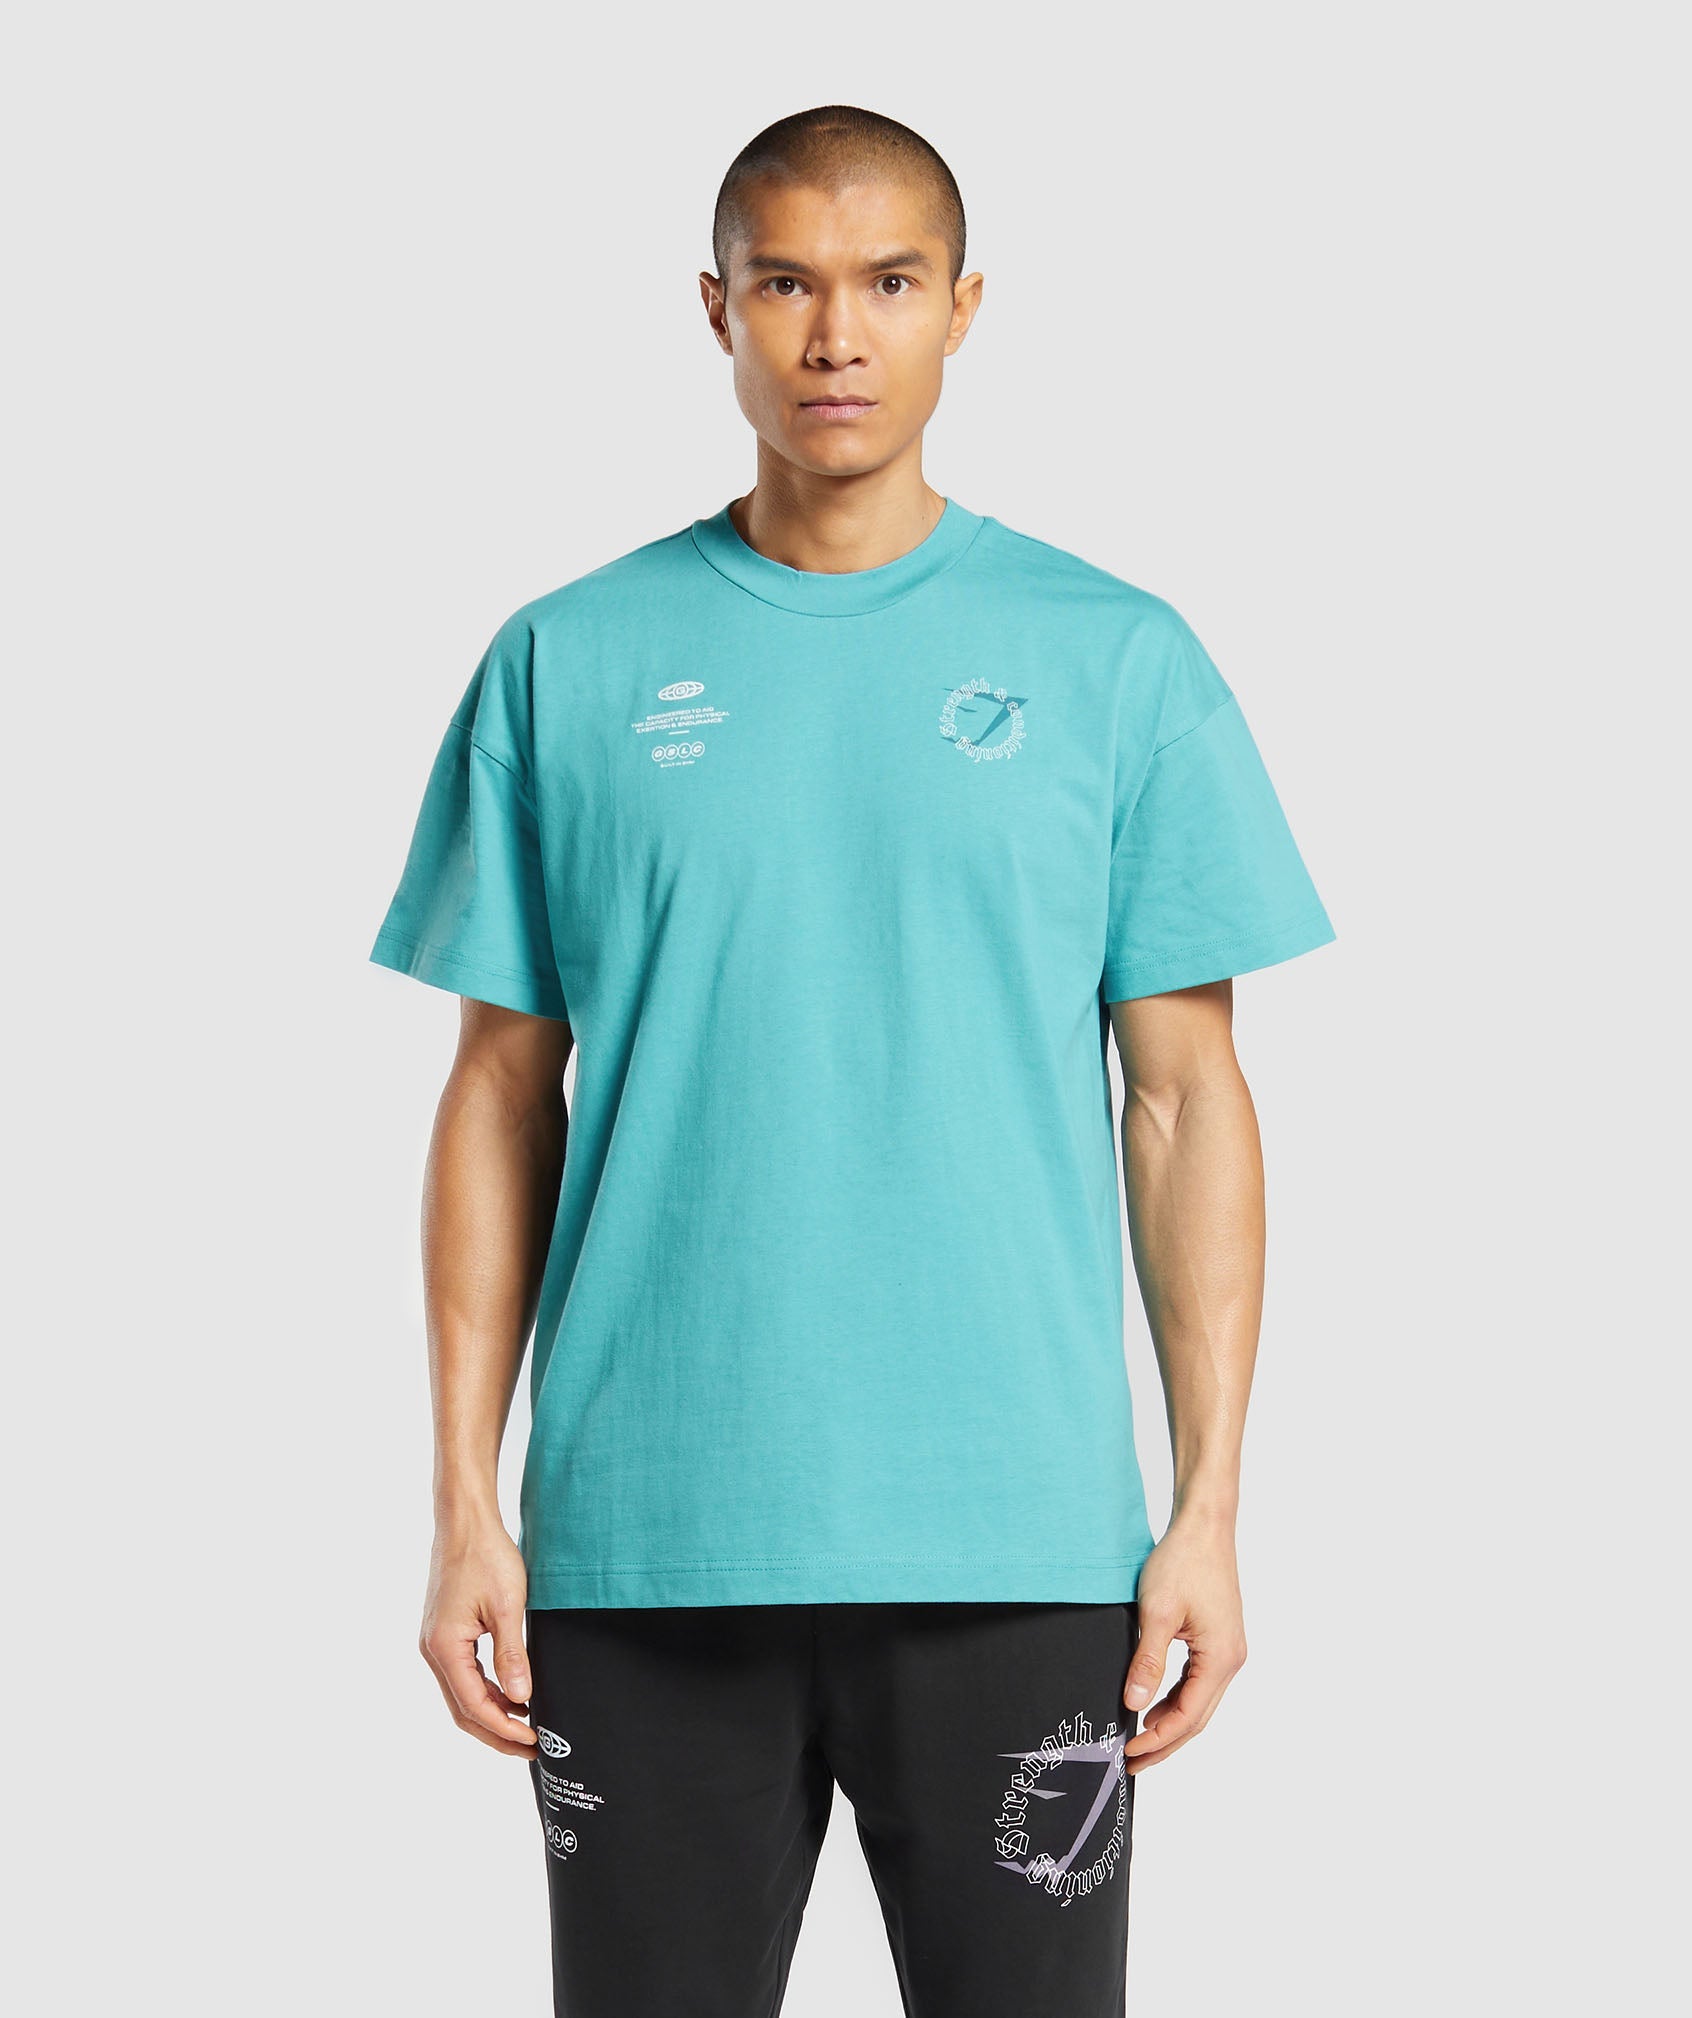 Strength and Conditioning T-Shirt in Artificial Teal - view 2